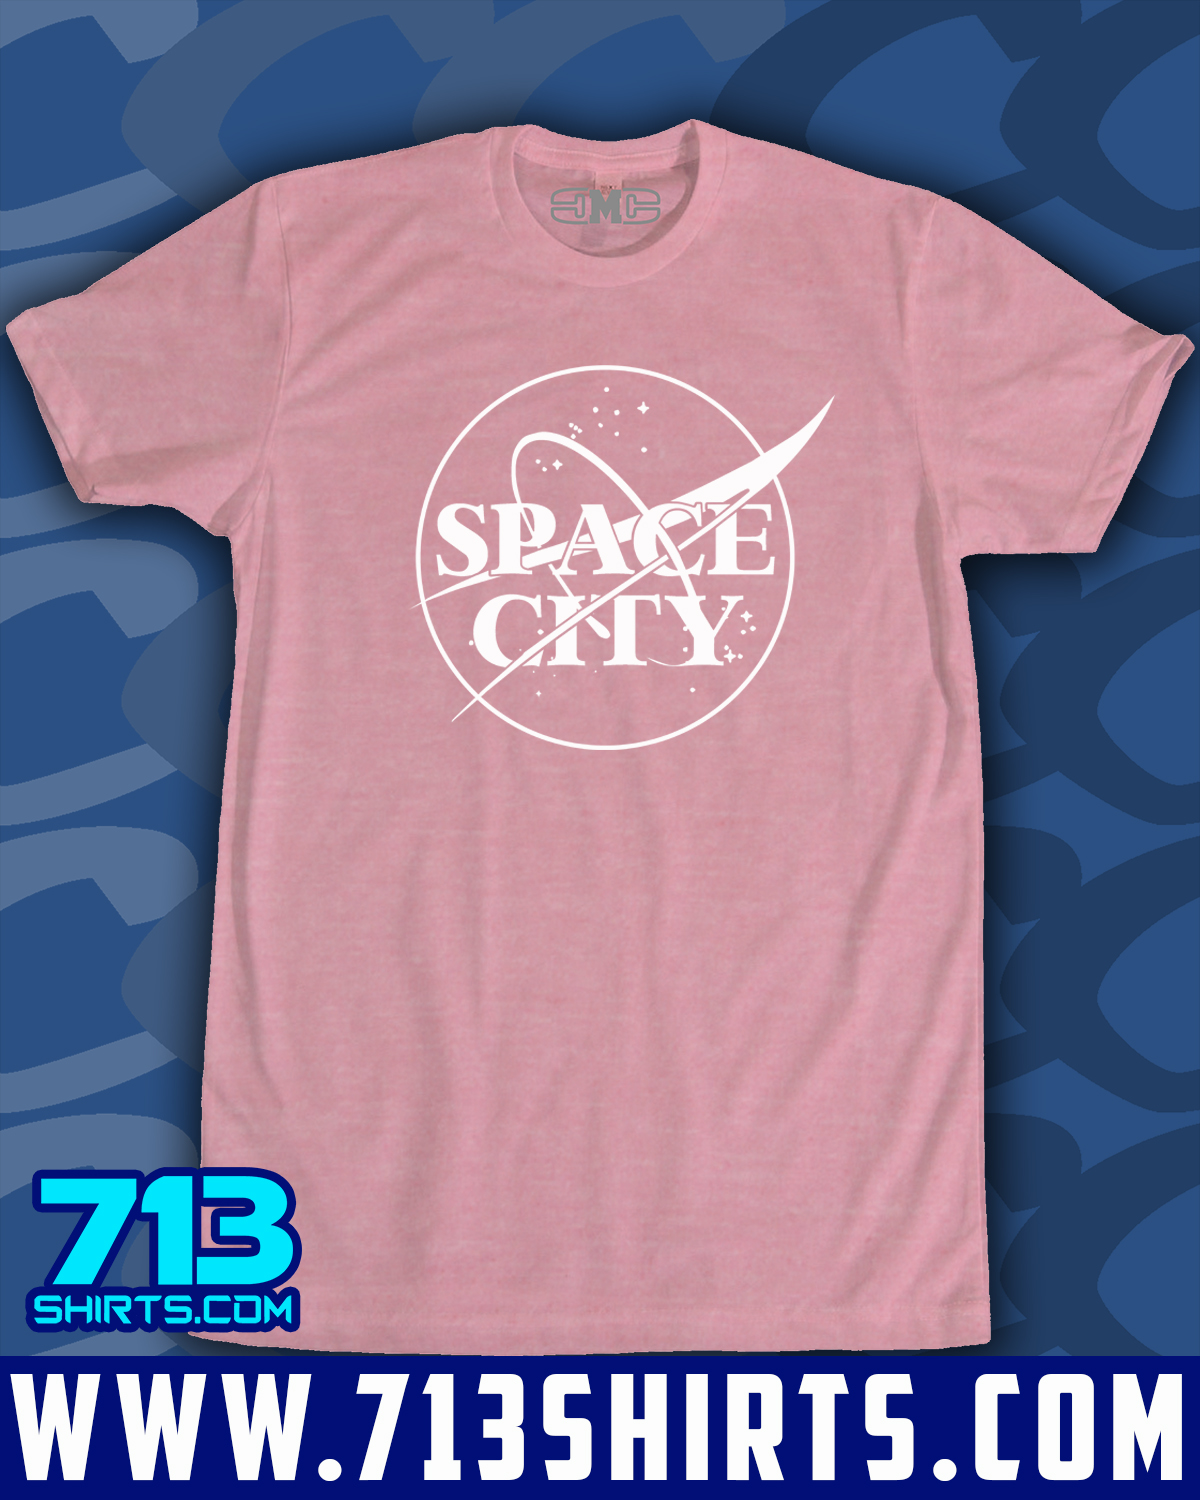  Space City Soccer Shirts H-Town Vintage Style Astronaut Classic  Dri-Power Unisex Adult T-Shirts - Made in USA : Clothing, Shoes & Jewelry